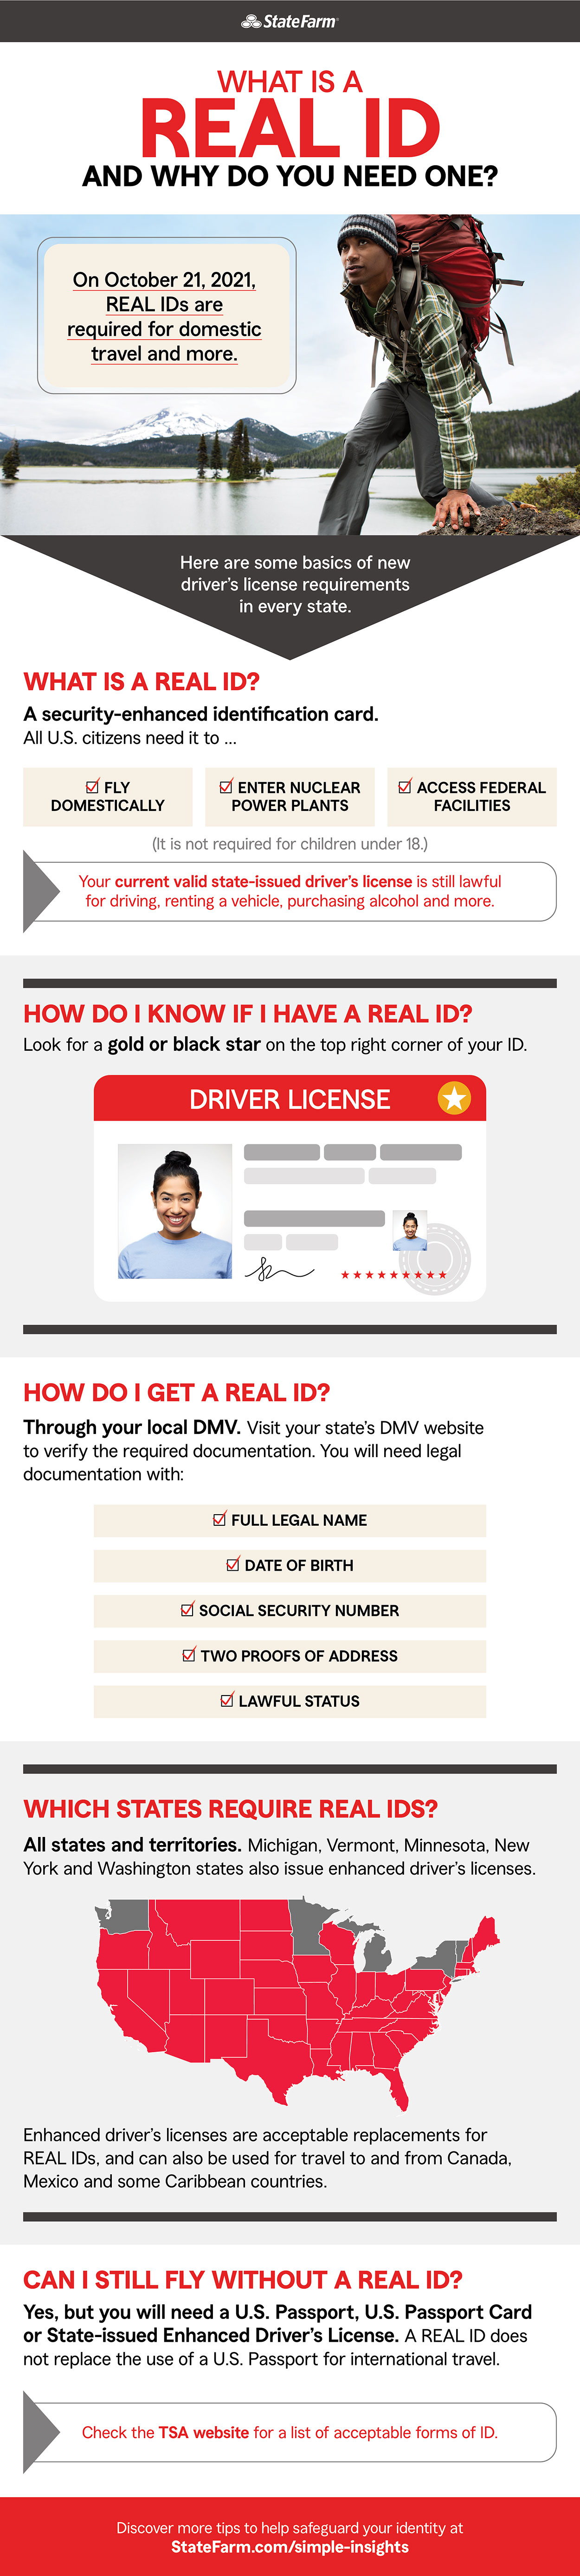 Infographic that shows why you need a REAL ID and what it is.